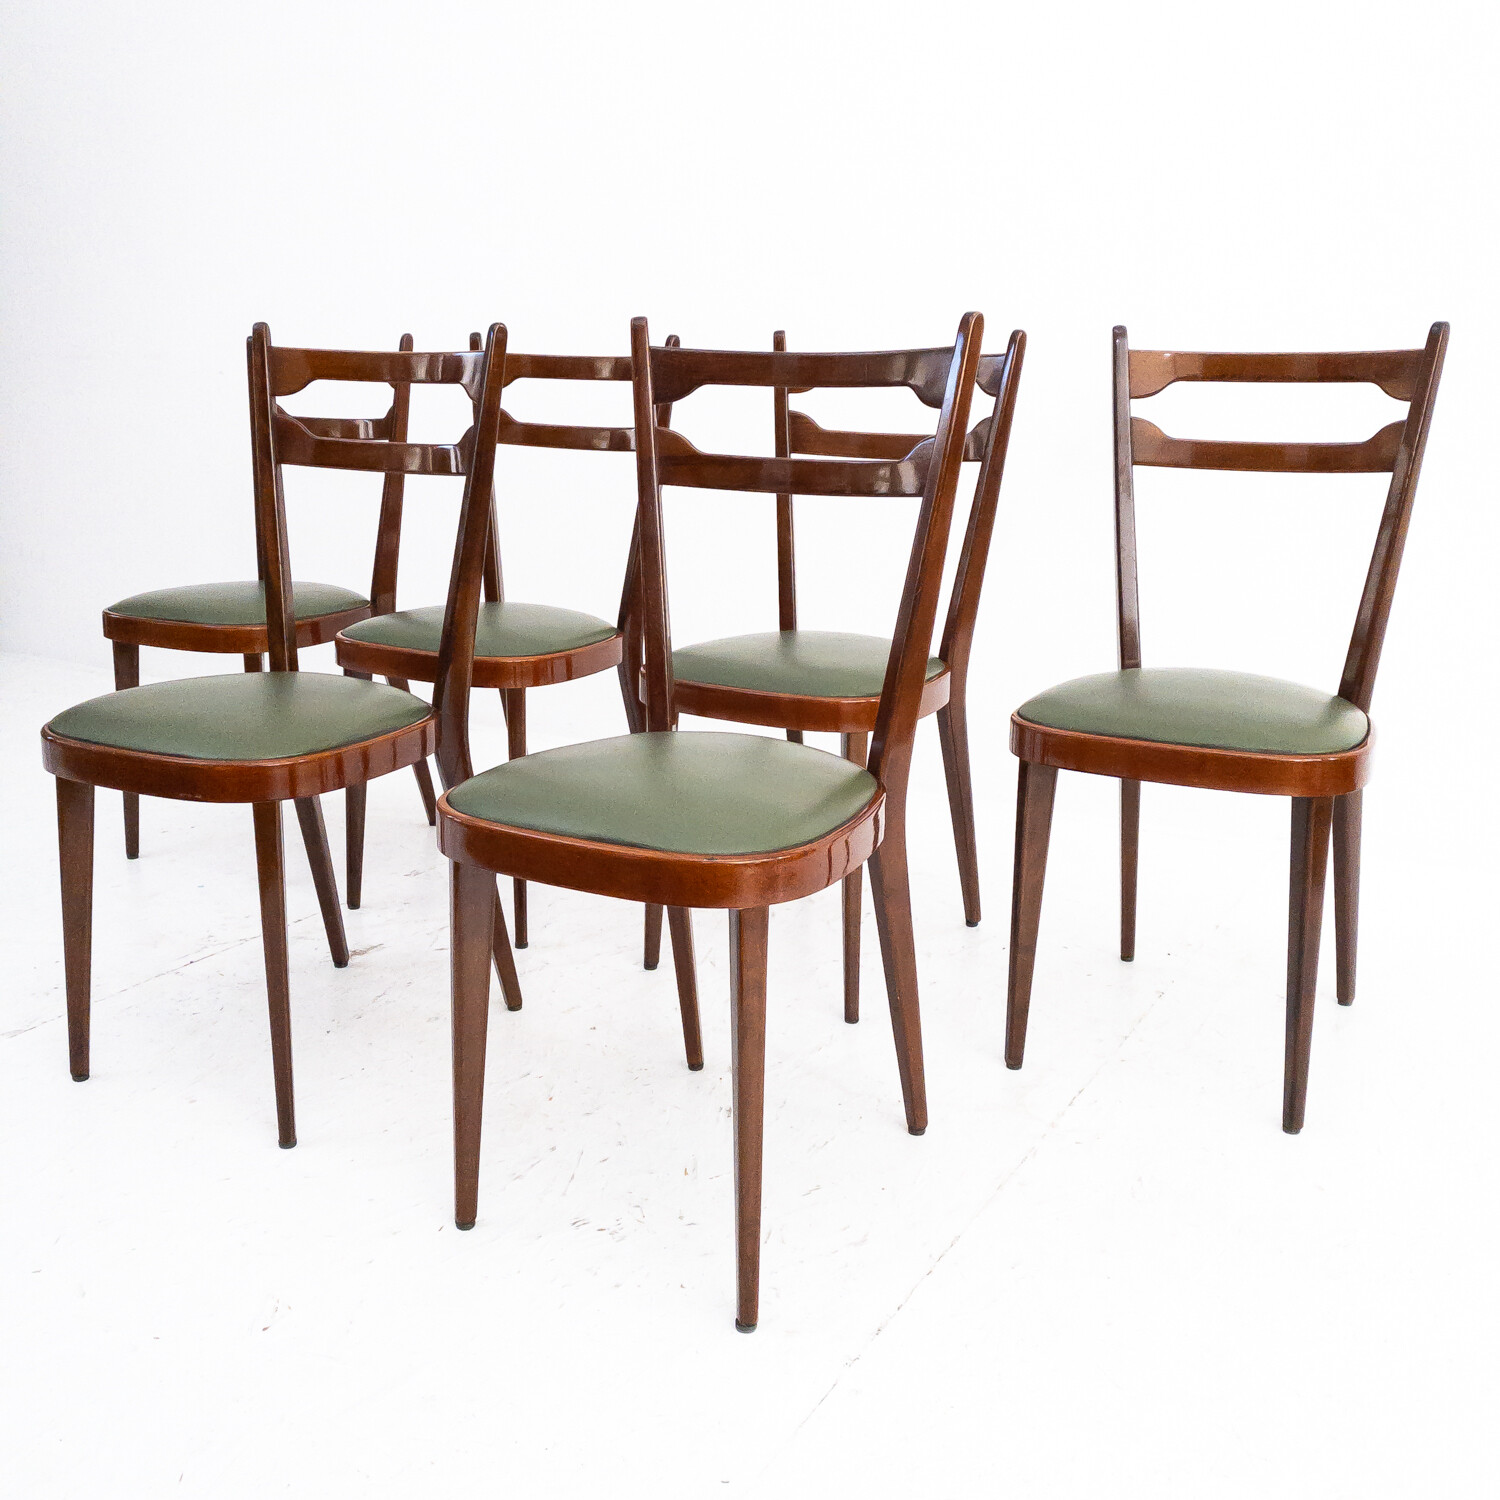 Set of 6 chairs in Paolo Buffa style, Italy 1950s